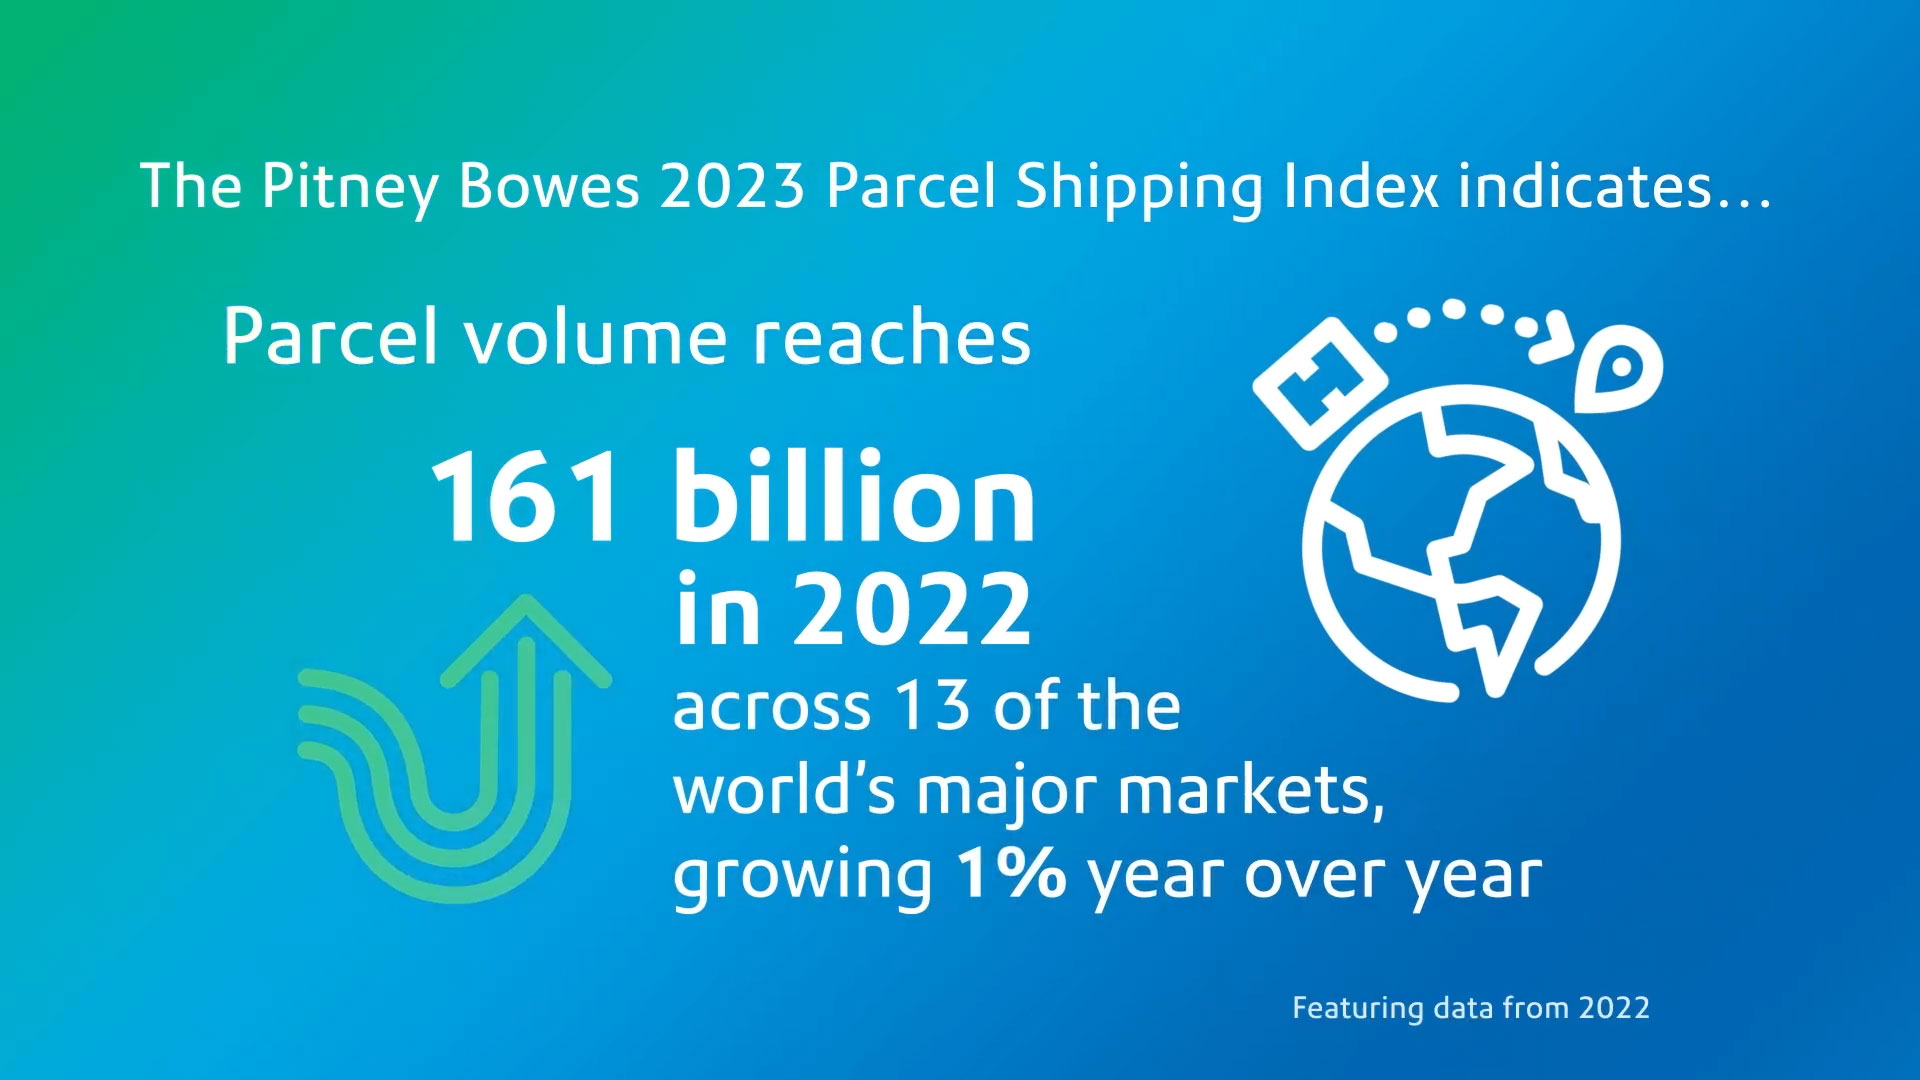 Pitney Bowes Parcel Shipping Index video - 2022 global data